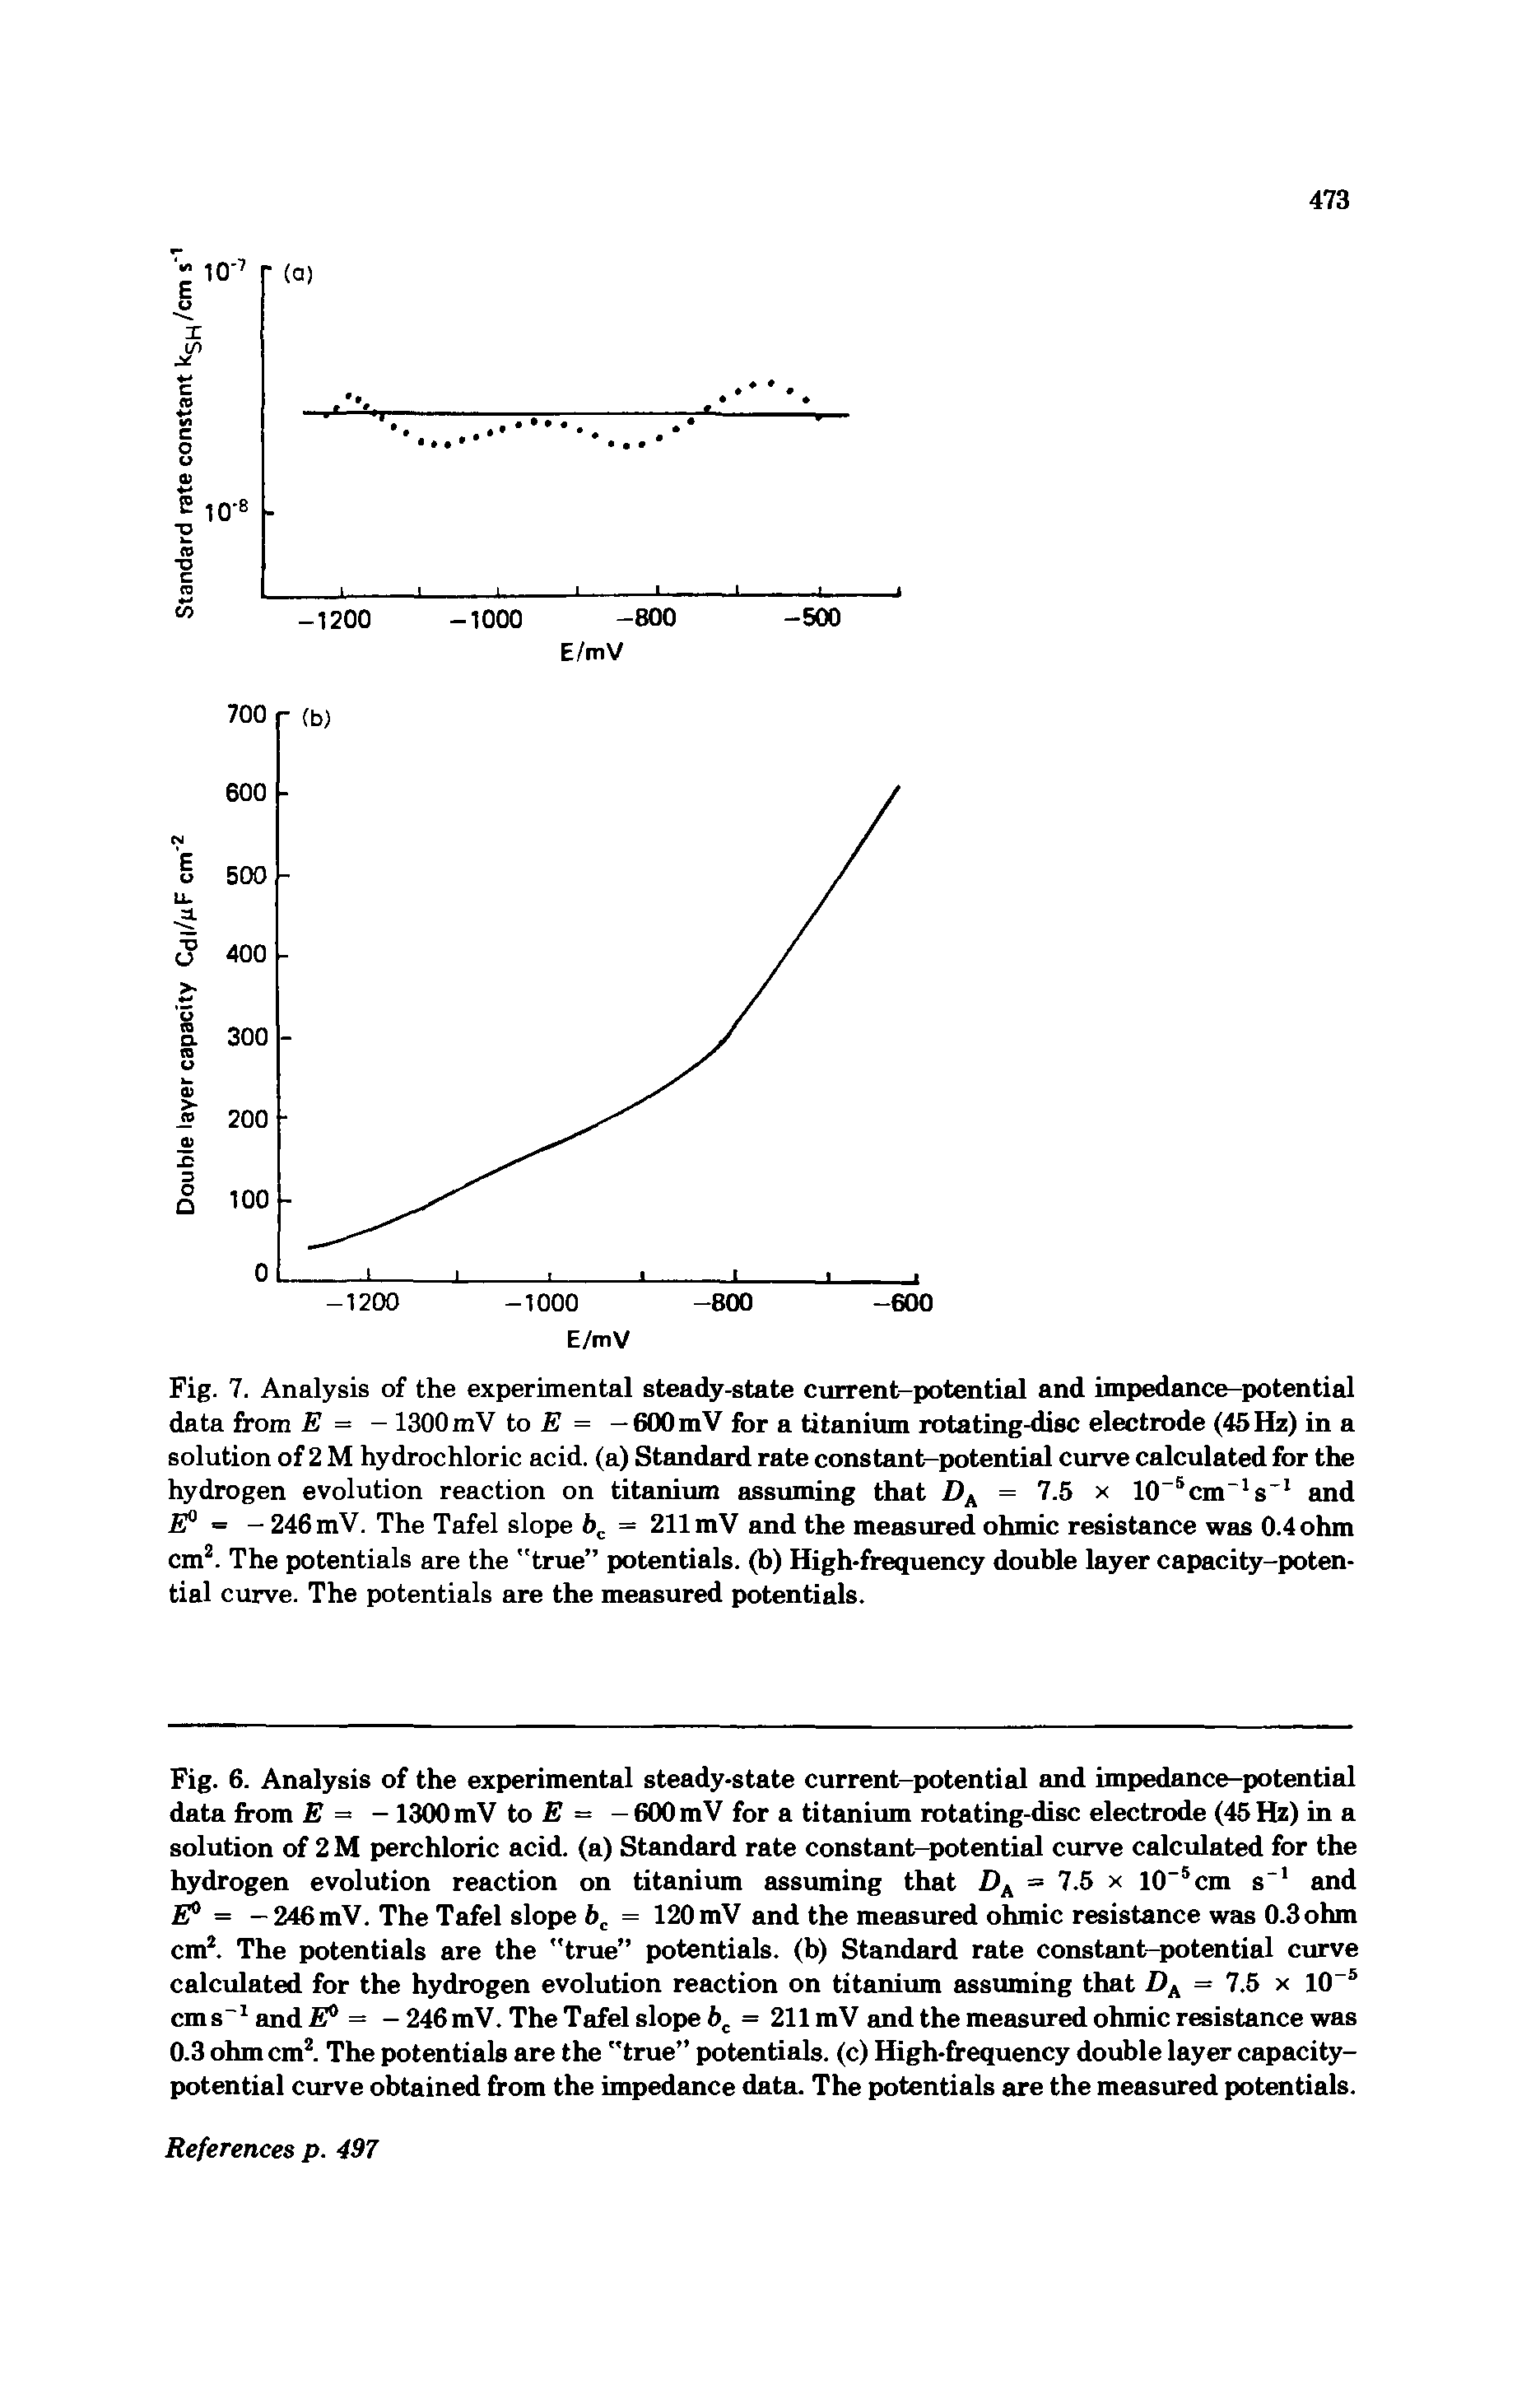 Fig. 6. Analysis of the experimental steady-state current-potential and impedance-potential data from E = -1300 mV to E = -600 mV for a titanium rotating-disc electrode (45 Hz) in a solution of 2 M perchloric acid, (a) Standard rate constant-potential curve calculated for the hydrogen evolution reaction on titanium assuming that DA = 7.5 x 10-5cm s and E° = —246 mV. The Tafel slope bc = 120 mV and the measured ohmic resistance was 0.3 ohm cm2. The potentials are the "true potentials, (b) Standard rate constant-potential curve calculated for the hydrogen evolution reaction on titanium assuming that DA = 7.5 x 10-5 cms-1 and E° = — 246mV. The Tafel slope bc = 211 mV and the measured ohmic resistance was 0.3 ohm cm2. The potentials are the "true potentials, (c) High-frequency double layer capacity-potential curve obtained from the impedance data. The potentials are the measured potentials.